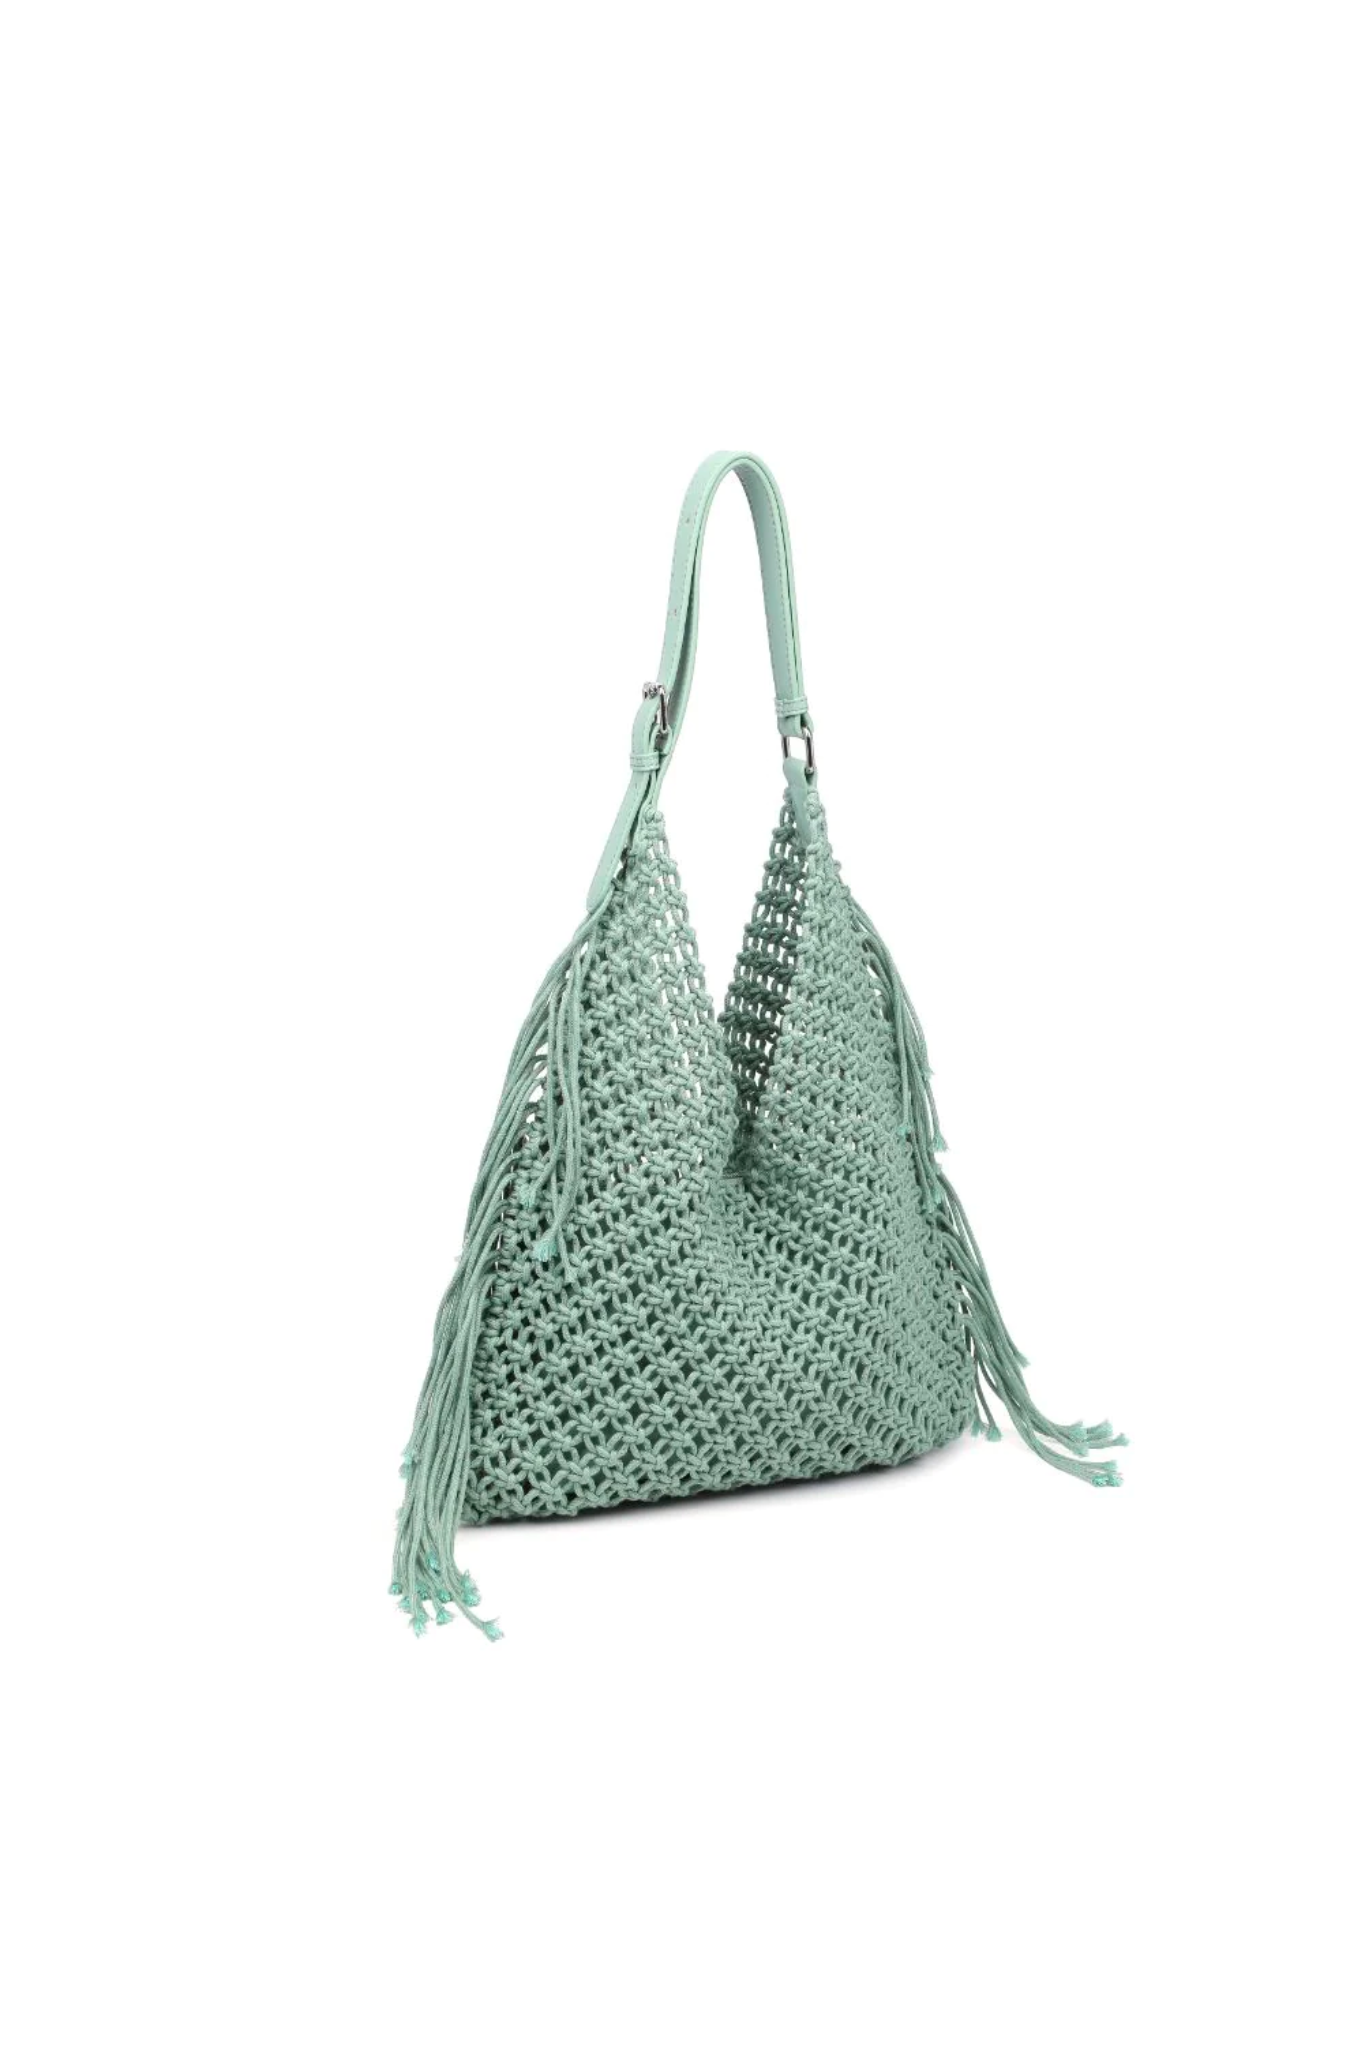 View 3 of Ariel Crochet Hobo Bag in Sage, a Bags from Larrea Cove. Detail: .